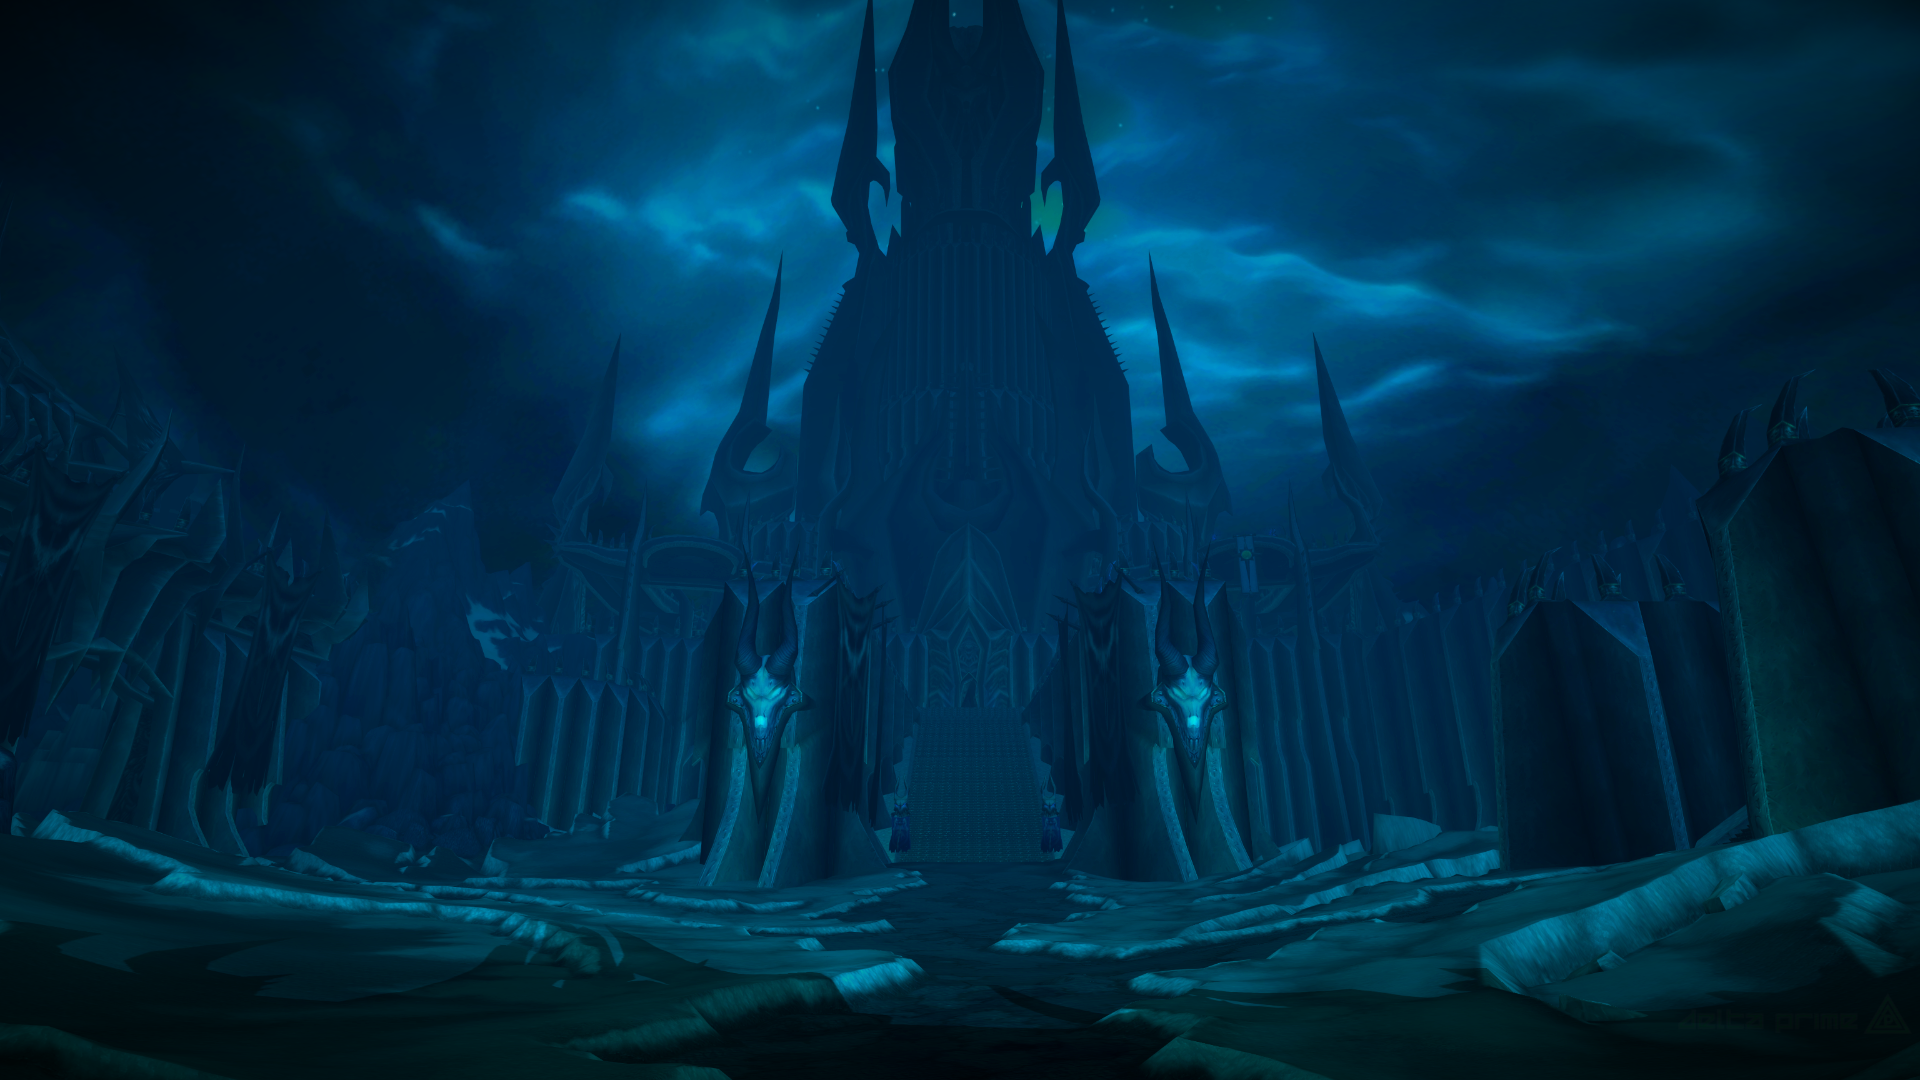 World Of Warcraft Wrath Of The Lich King Icecrown Citadel PC Gaming Screen Shot 1920x1080